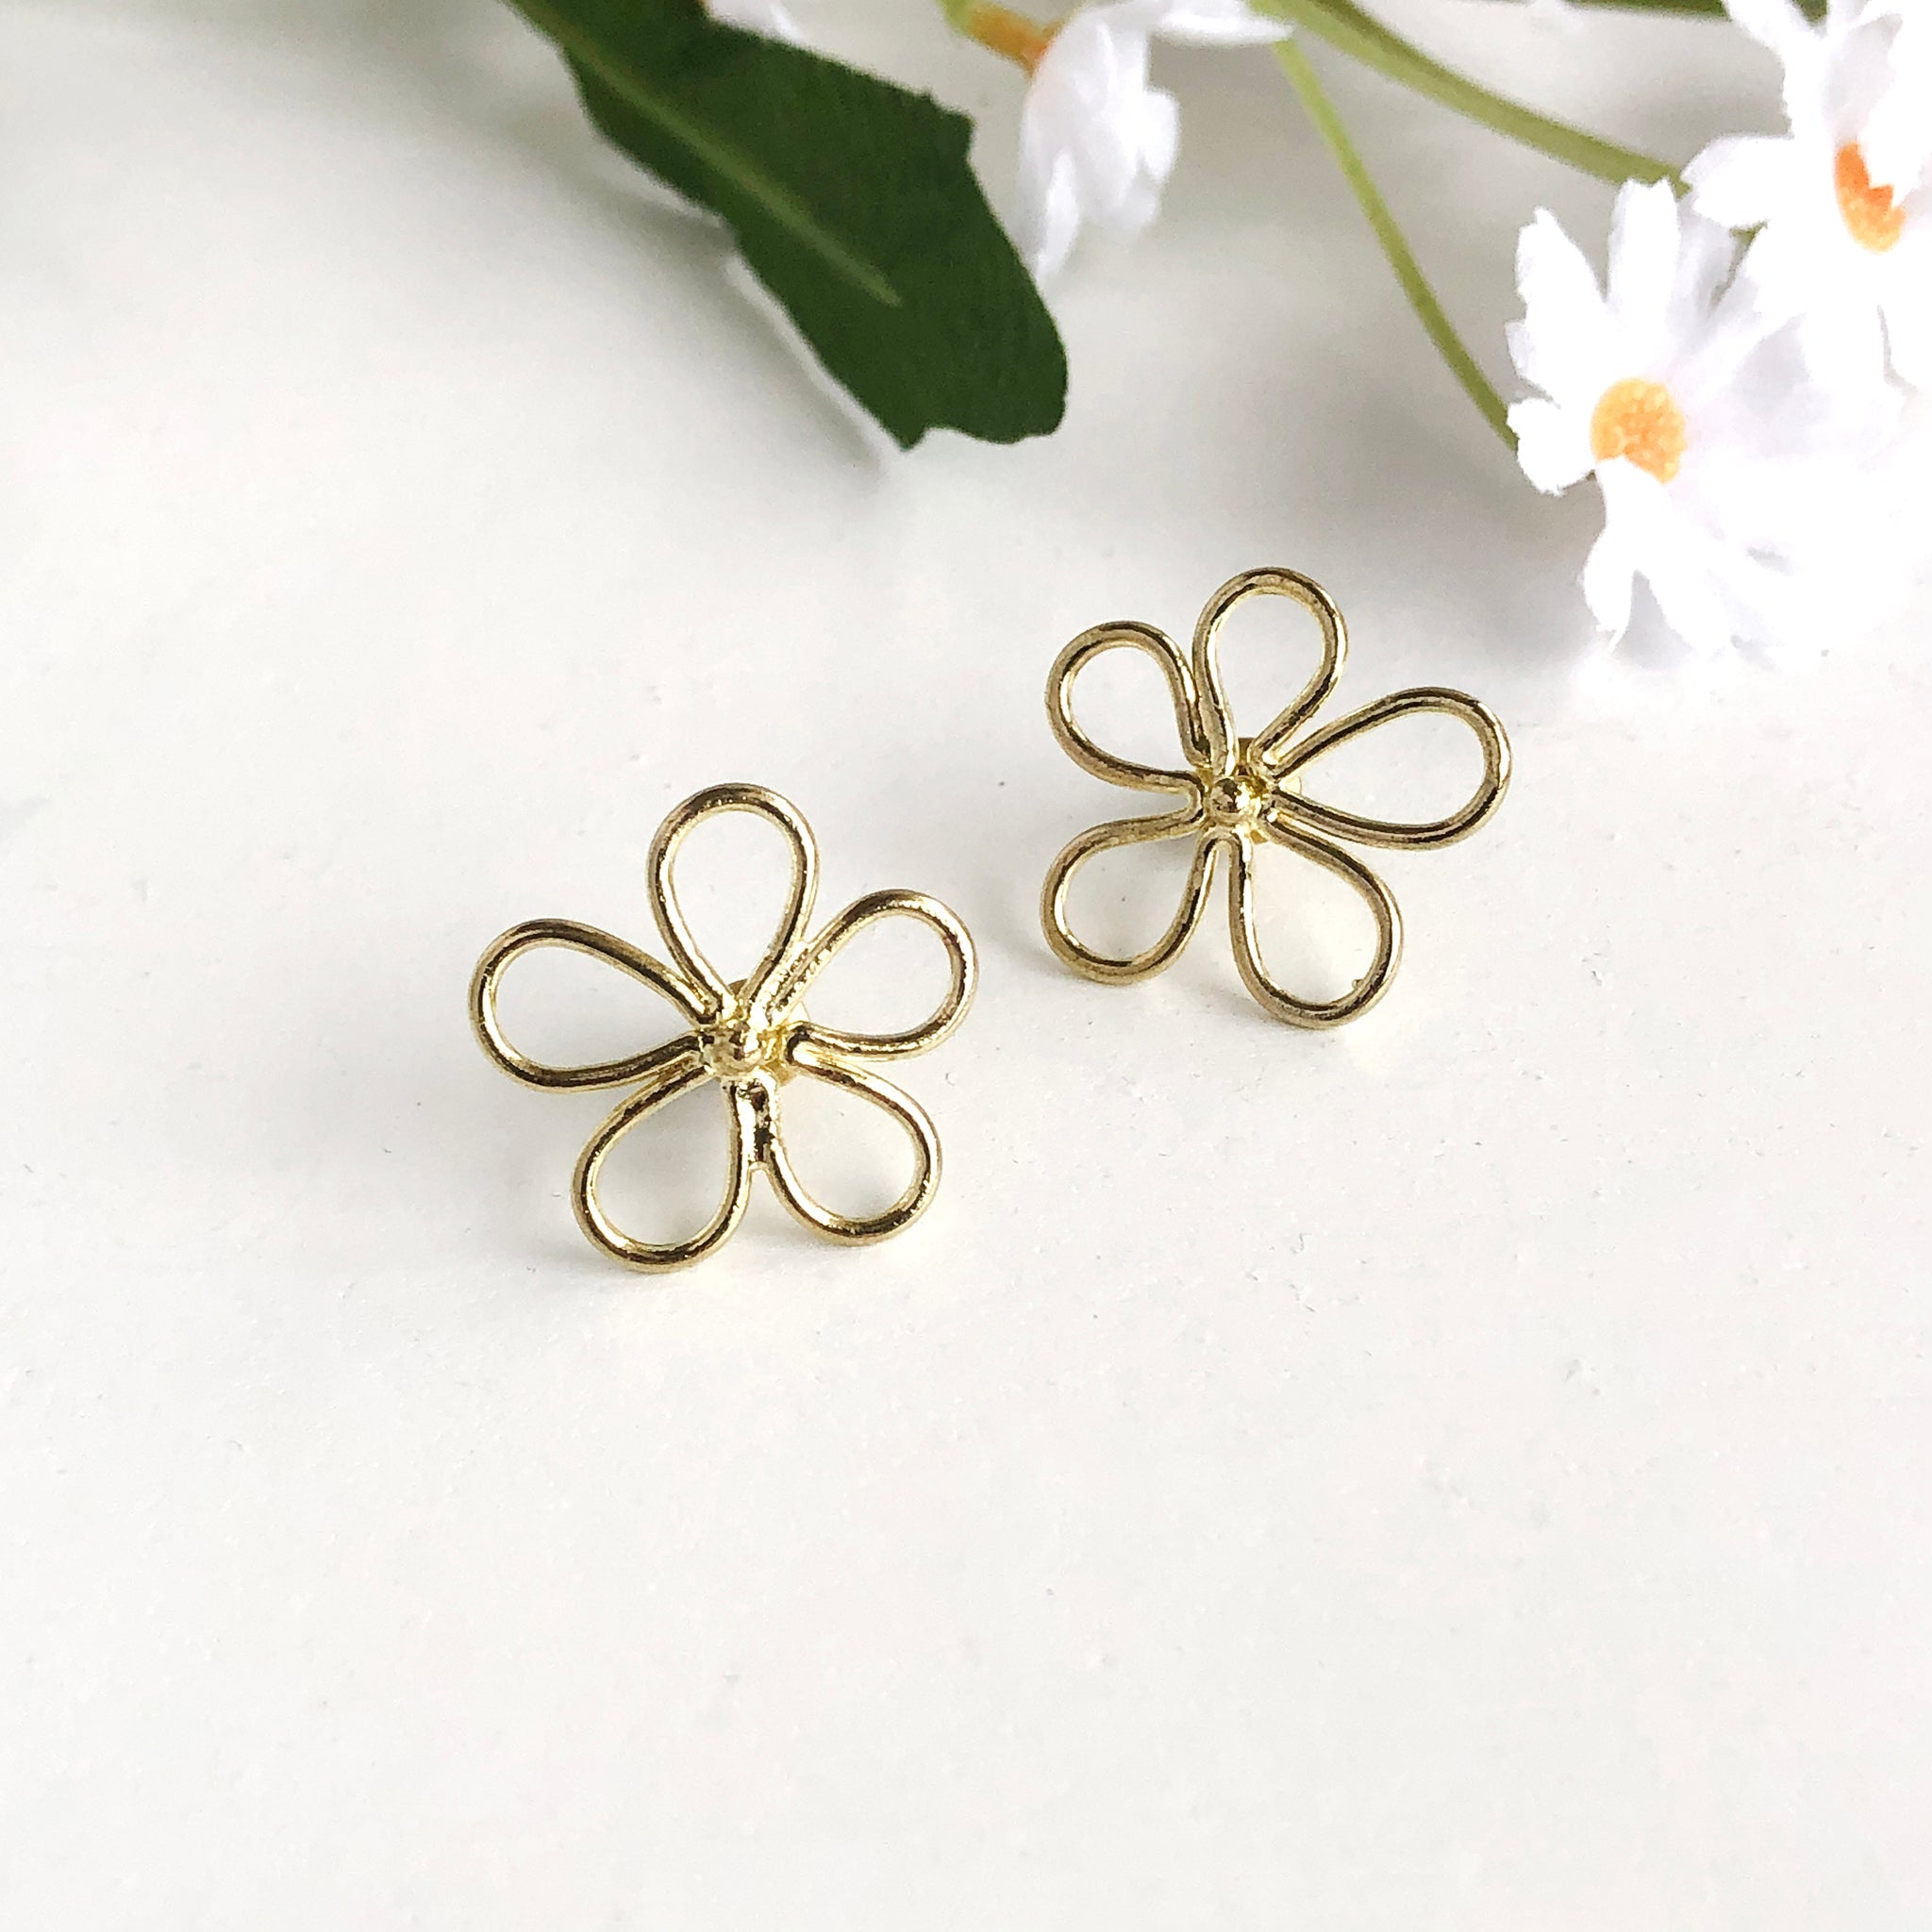 Two earrings are shown. Each is in the shape of a daisy, formed with a single gold wire for an outline-effect.